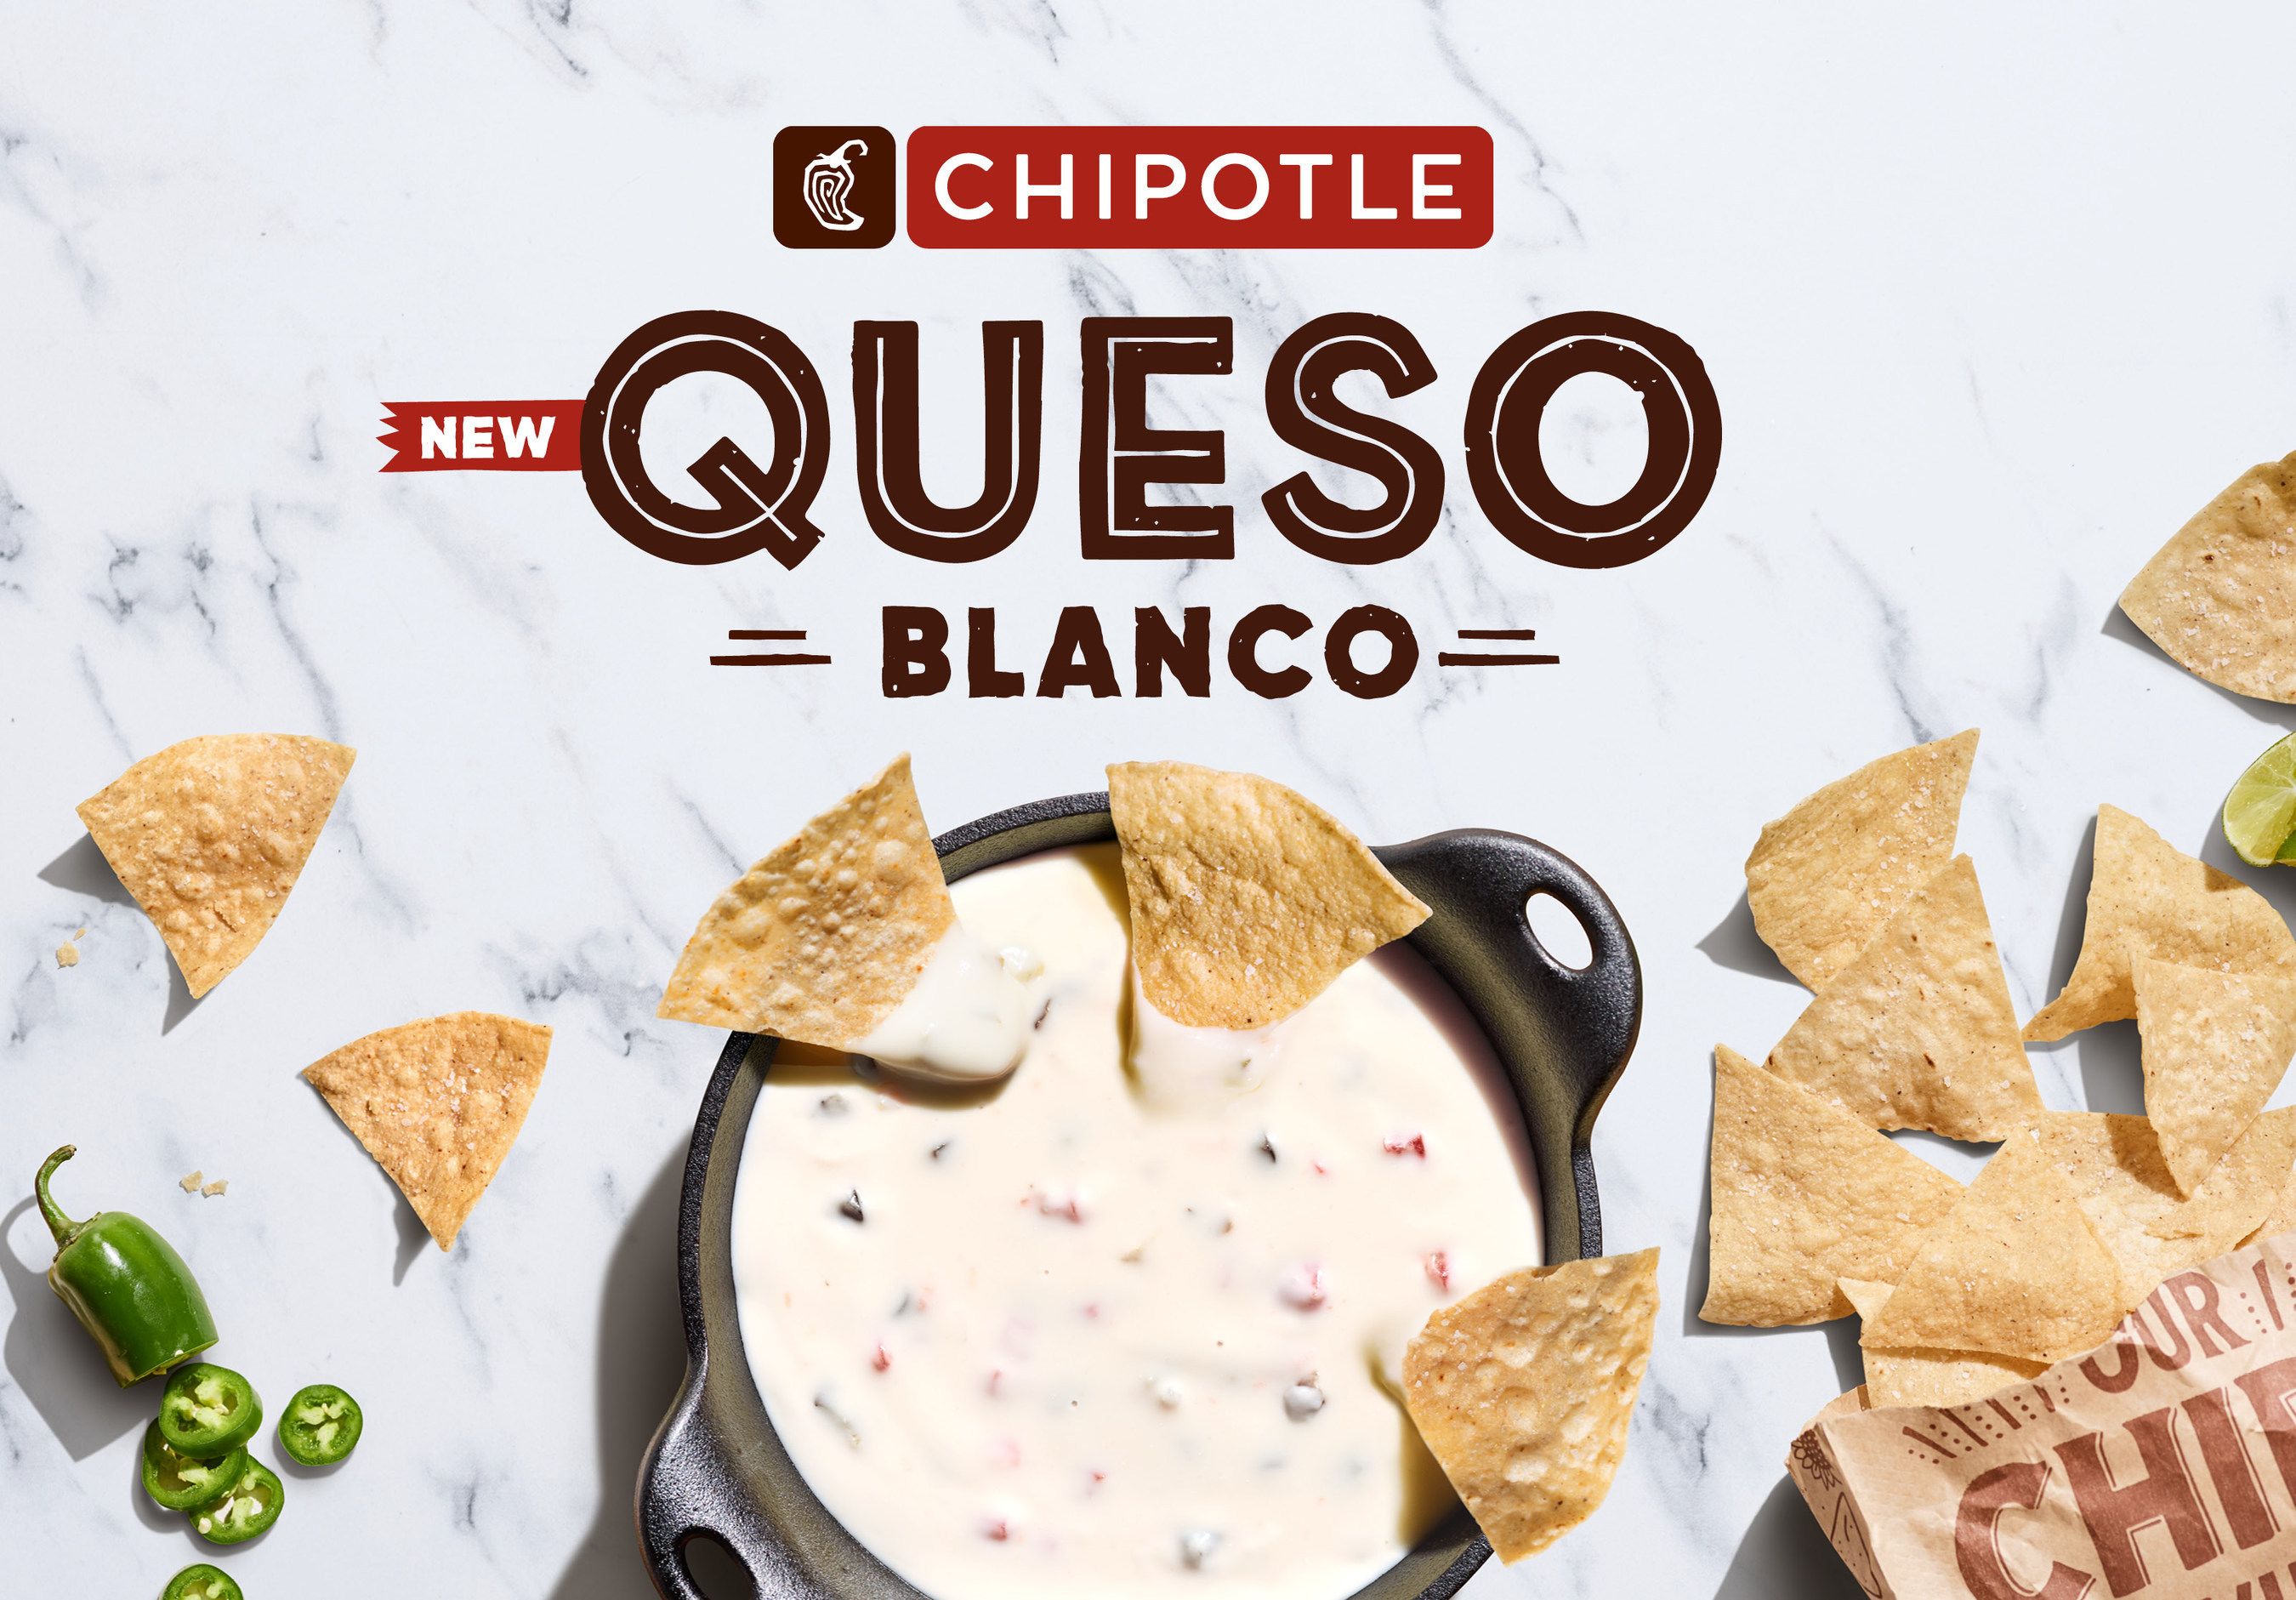 Chipotle is testing a new queso